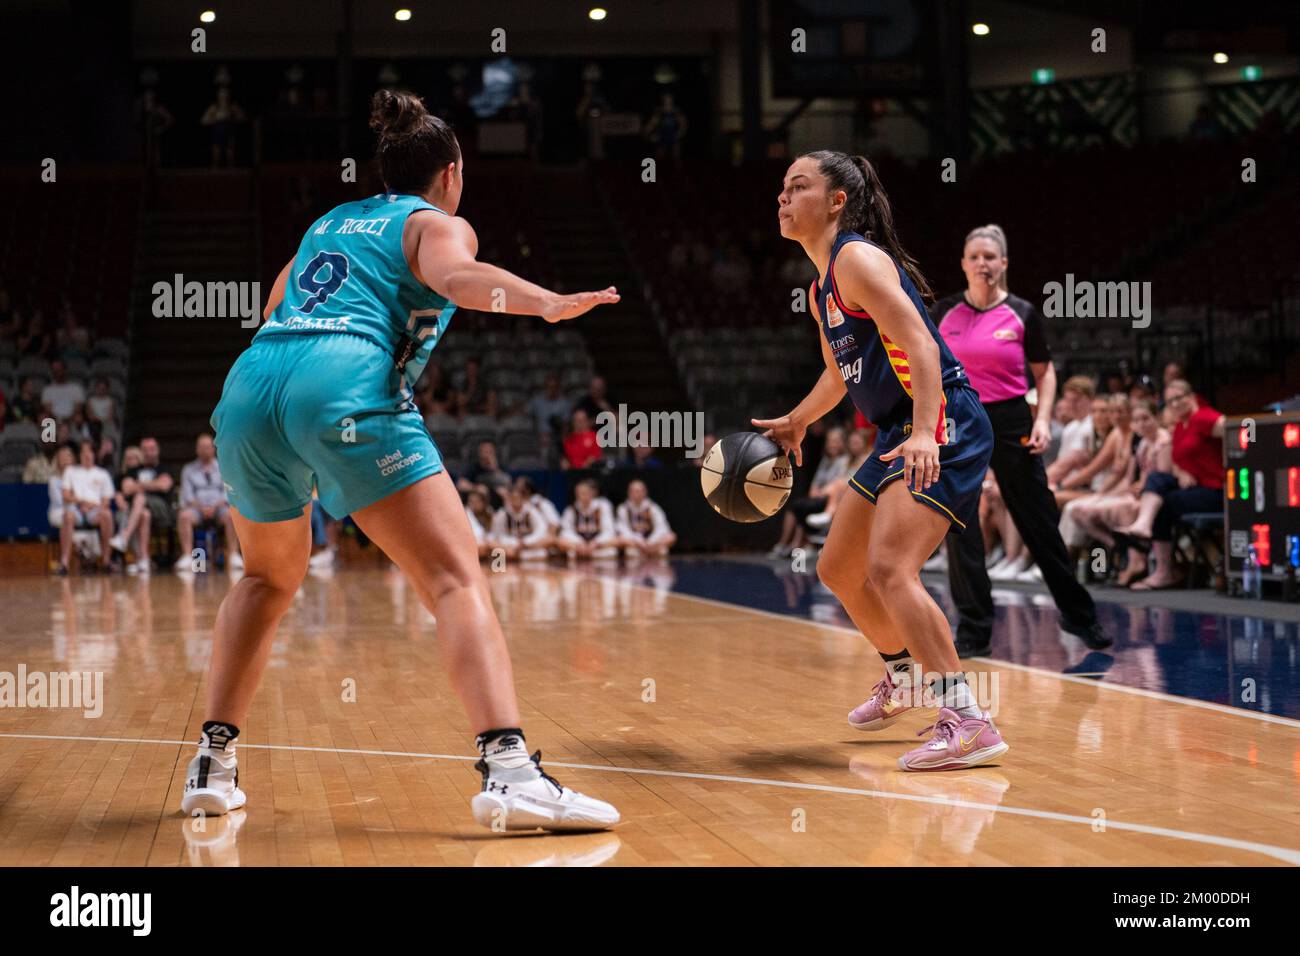 Adelaide, Australia. 03rd Dec, 2022. Adelaide, South Australia, December 3rd 2022: Abby Cubillo (9 Adelaide Lightning) dribbles the ball defended by Maddi Rocci (9 Southside Flyers) during the Cygnett WNBL game between Adelaide Lightning and Southside Flyers at Adelaide 36ers Arena in Adelaide, Australia. (Noe Llamas/SPP) Credit: SPP Sport Press Photo. /Alamy Live News Stock Photo